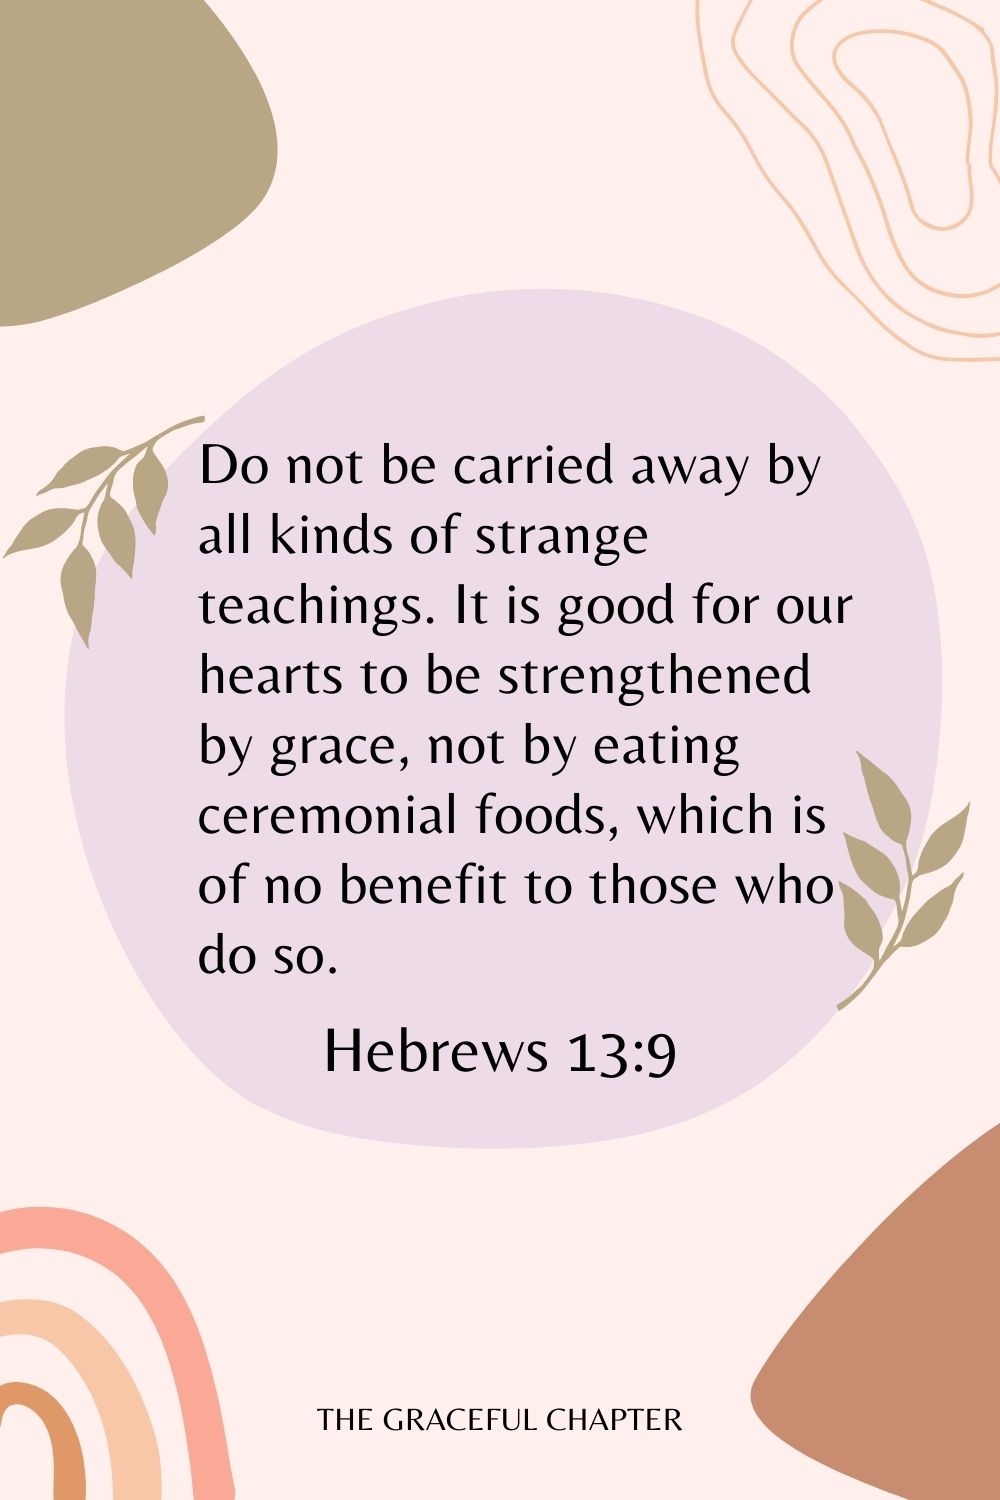 Do not be carried away by all kinds of strange teachings. It is good for our hearts to be strengthened by grace, not by eating ceremonial foods, which is of no benefit to those who do so. Hebrews 13:9